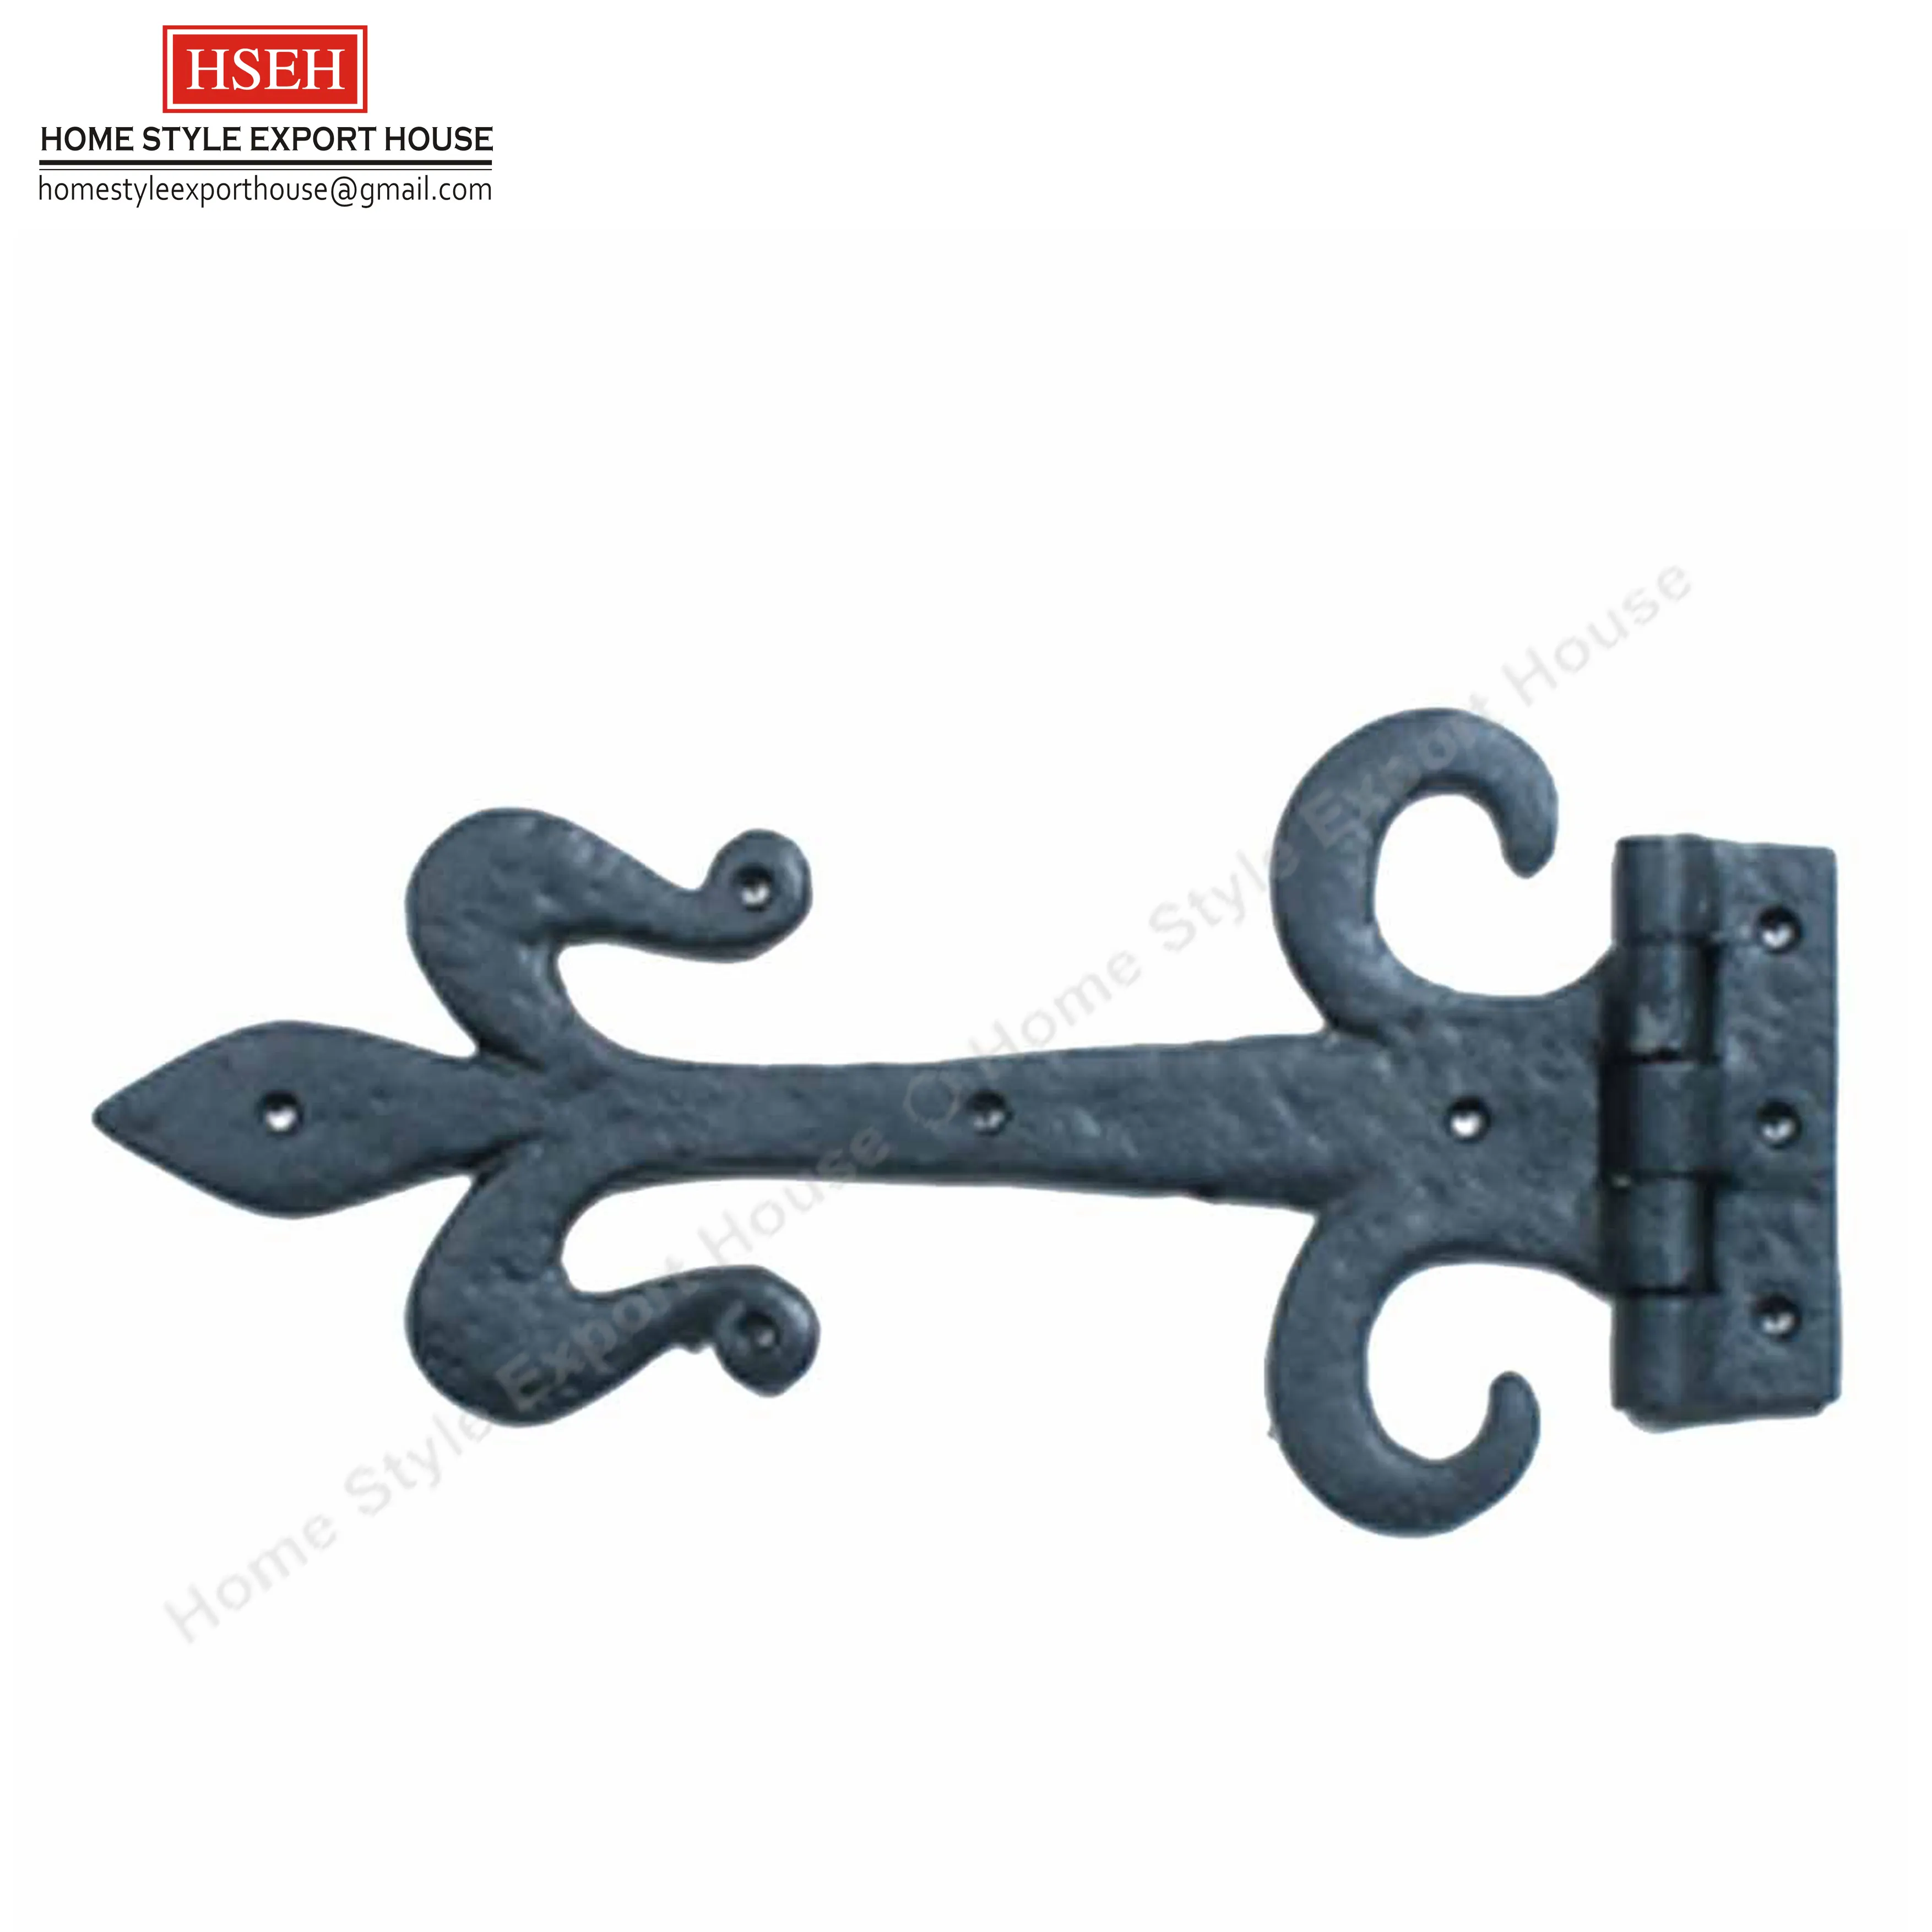 Rustic Handmade Cabinet Folding Furniture Hinges Furniture Fitting Foldable Metal Butterfly Designed Hinges